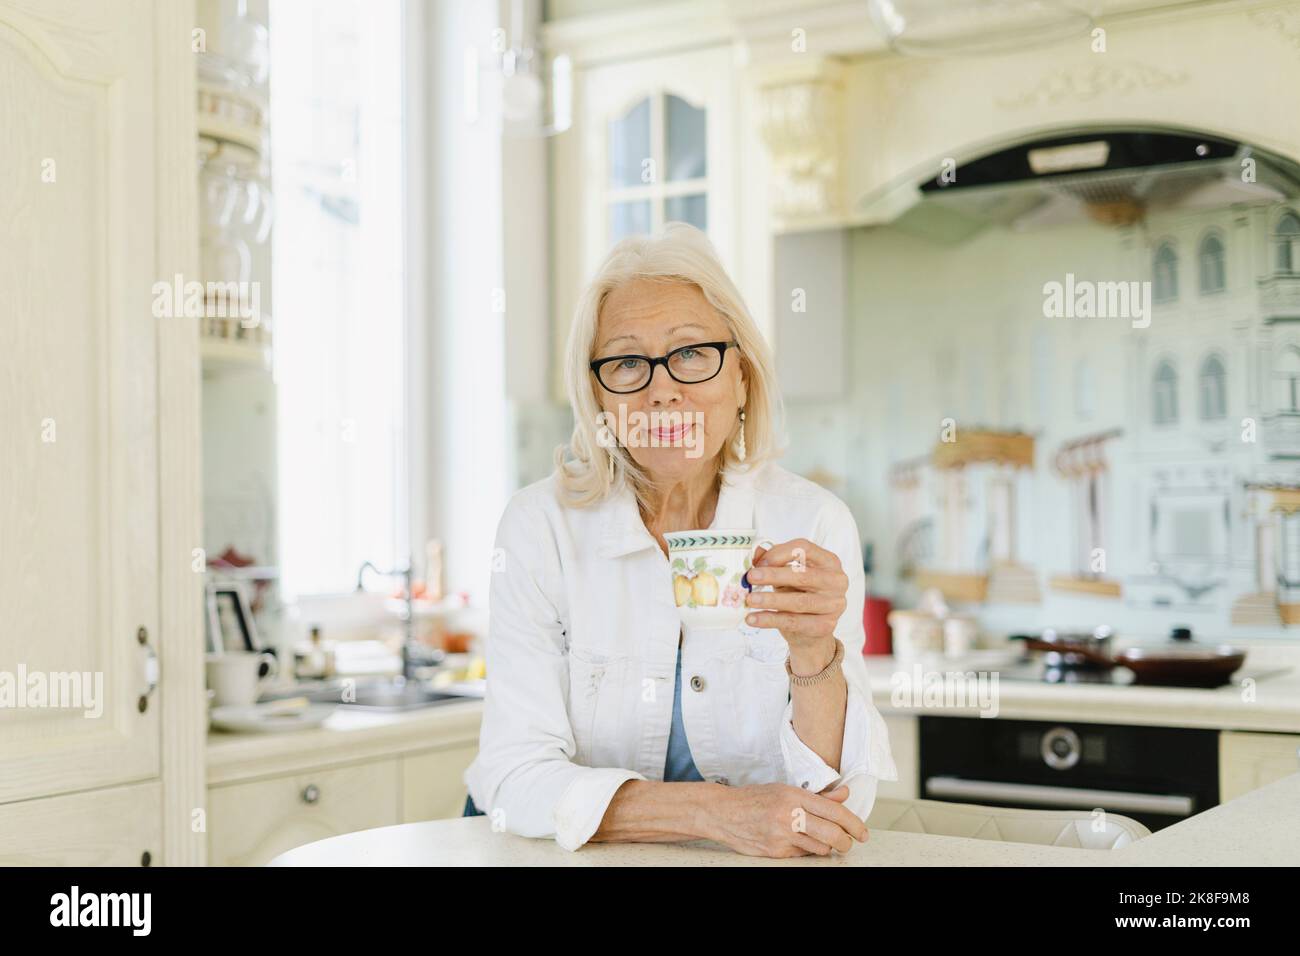 Senior woman holding cup leaning on kitchen island at home Stock Photo